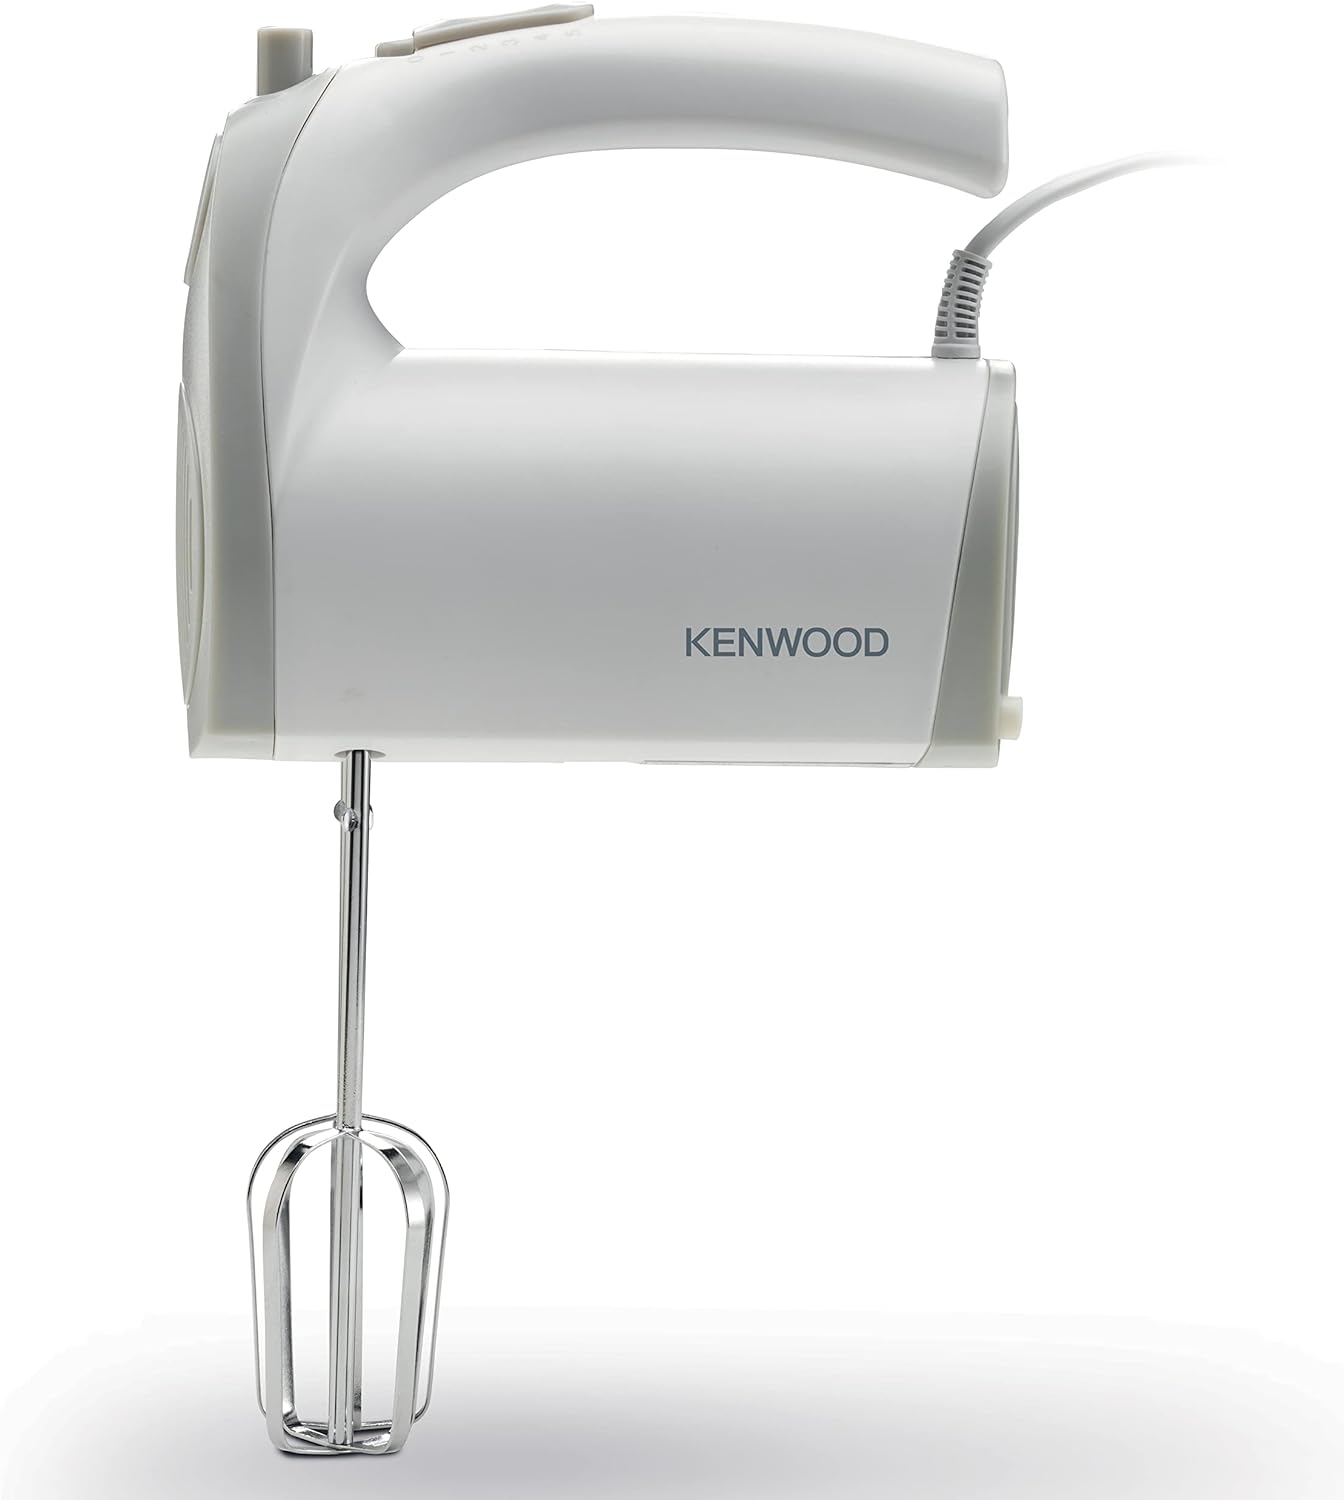 Kenwood Hand Mixer ,300 Watts, 5 Speeds + Turbo Button, Mixer And Double Stainless Steel